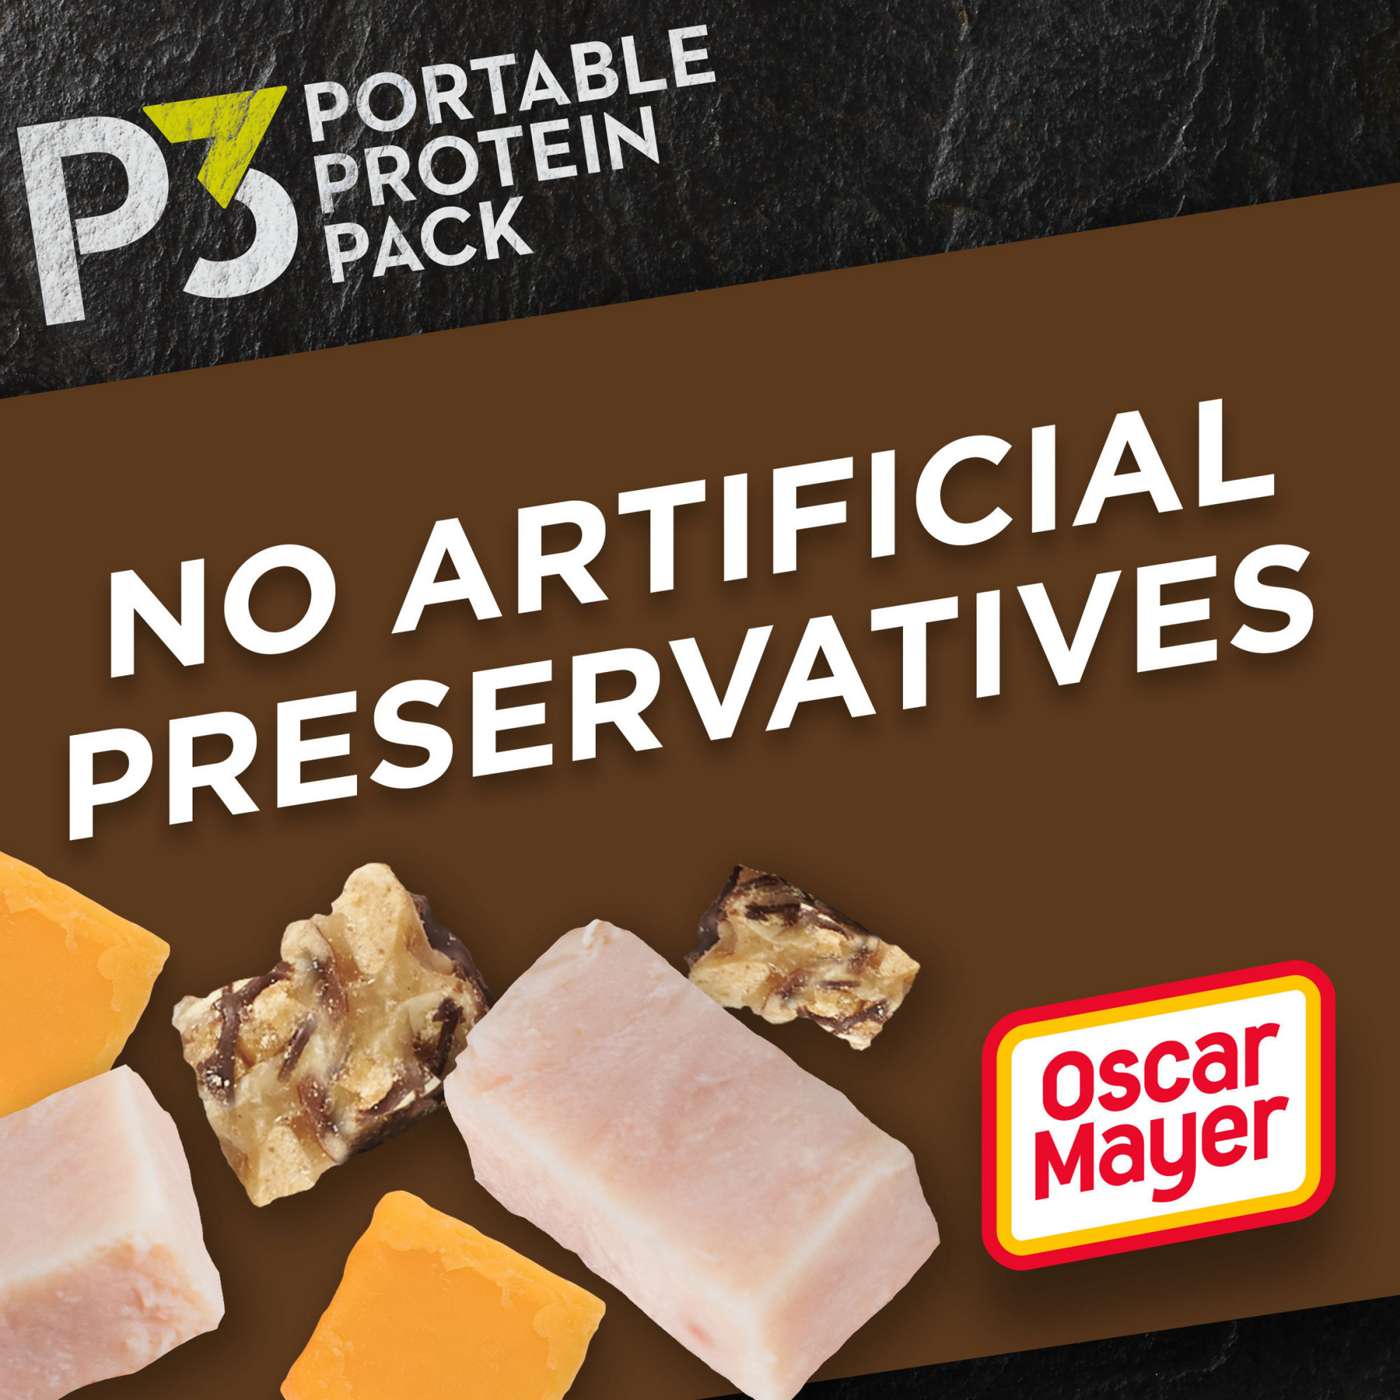 P3 Portable Protein Pack Snack Tray - Dark Chocolate Nut Clusters, Turkey & Cheddar; image 6 of 6